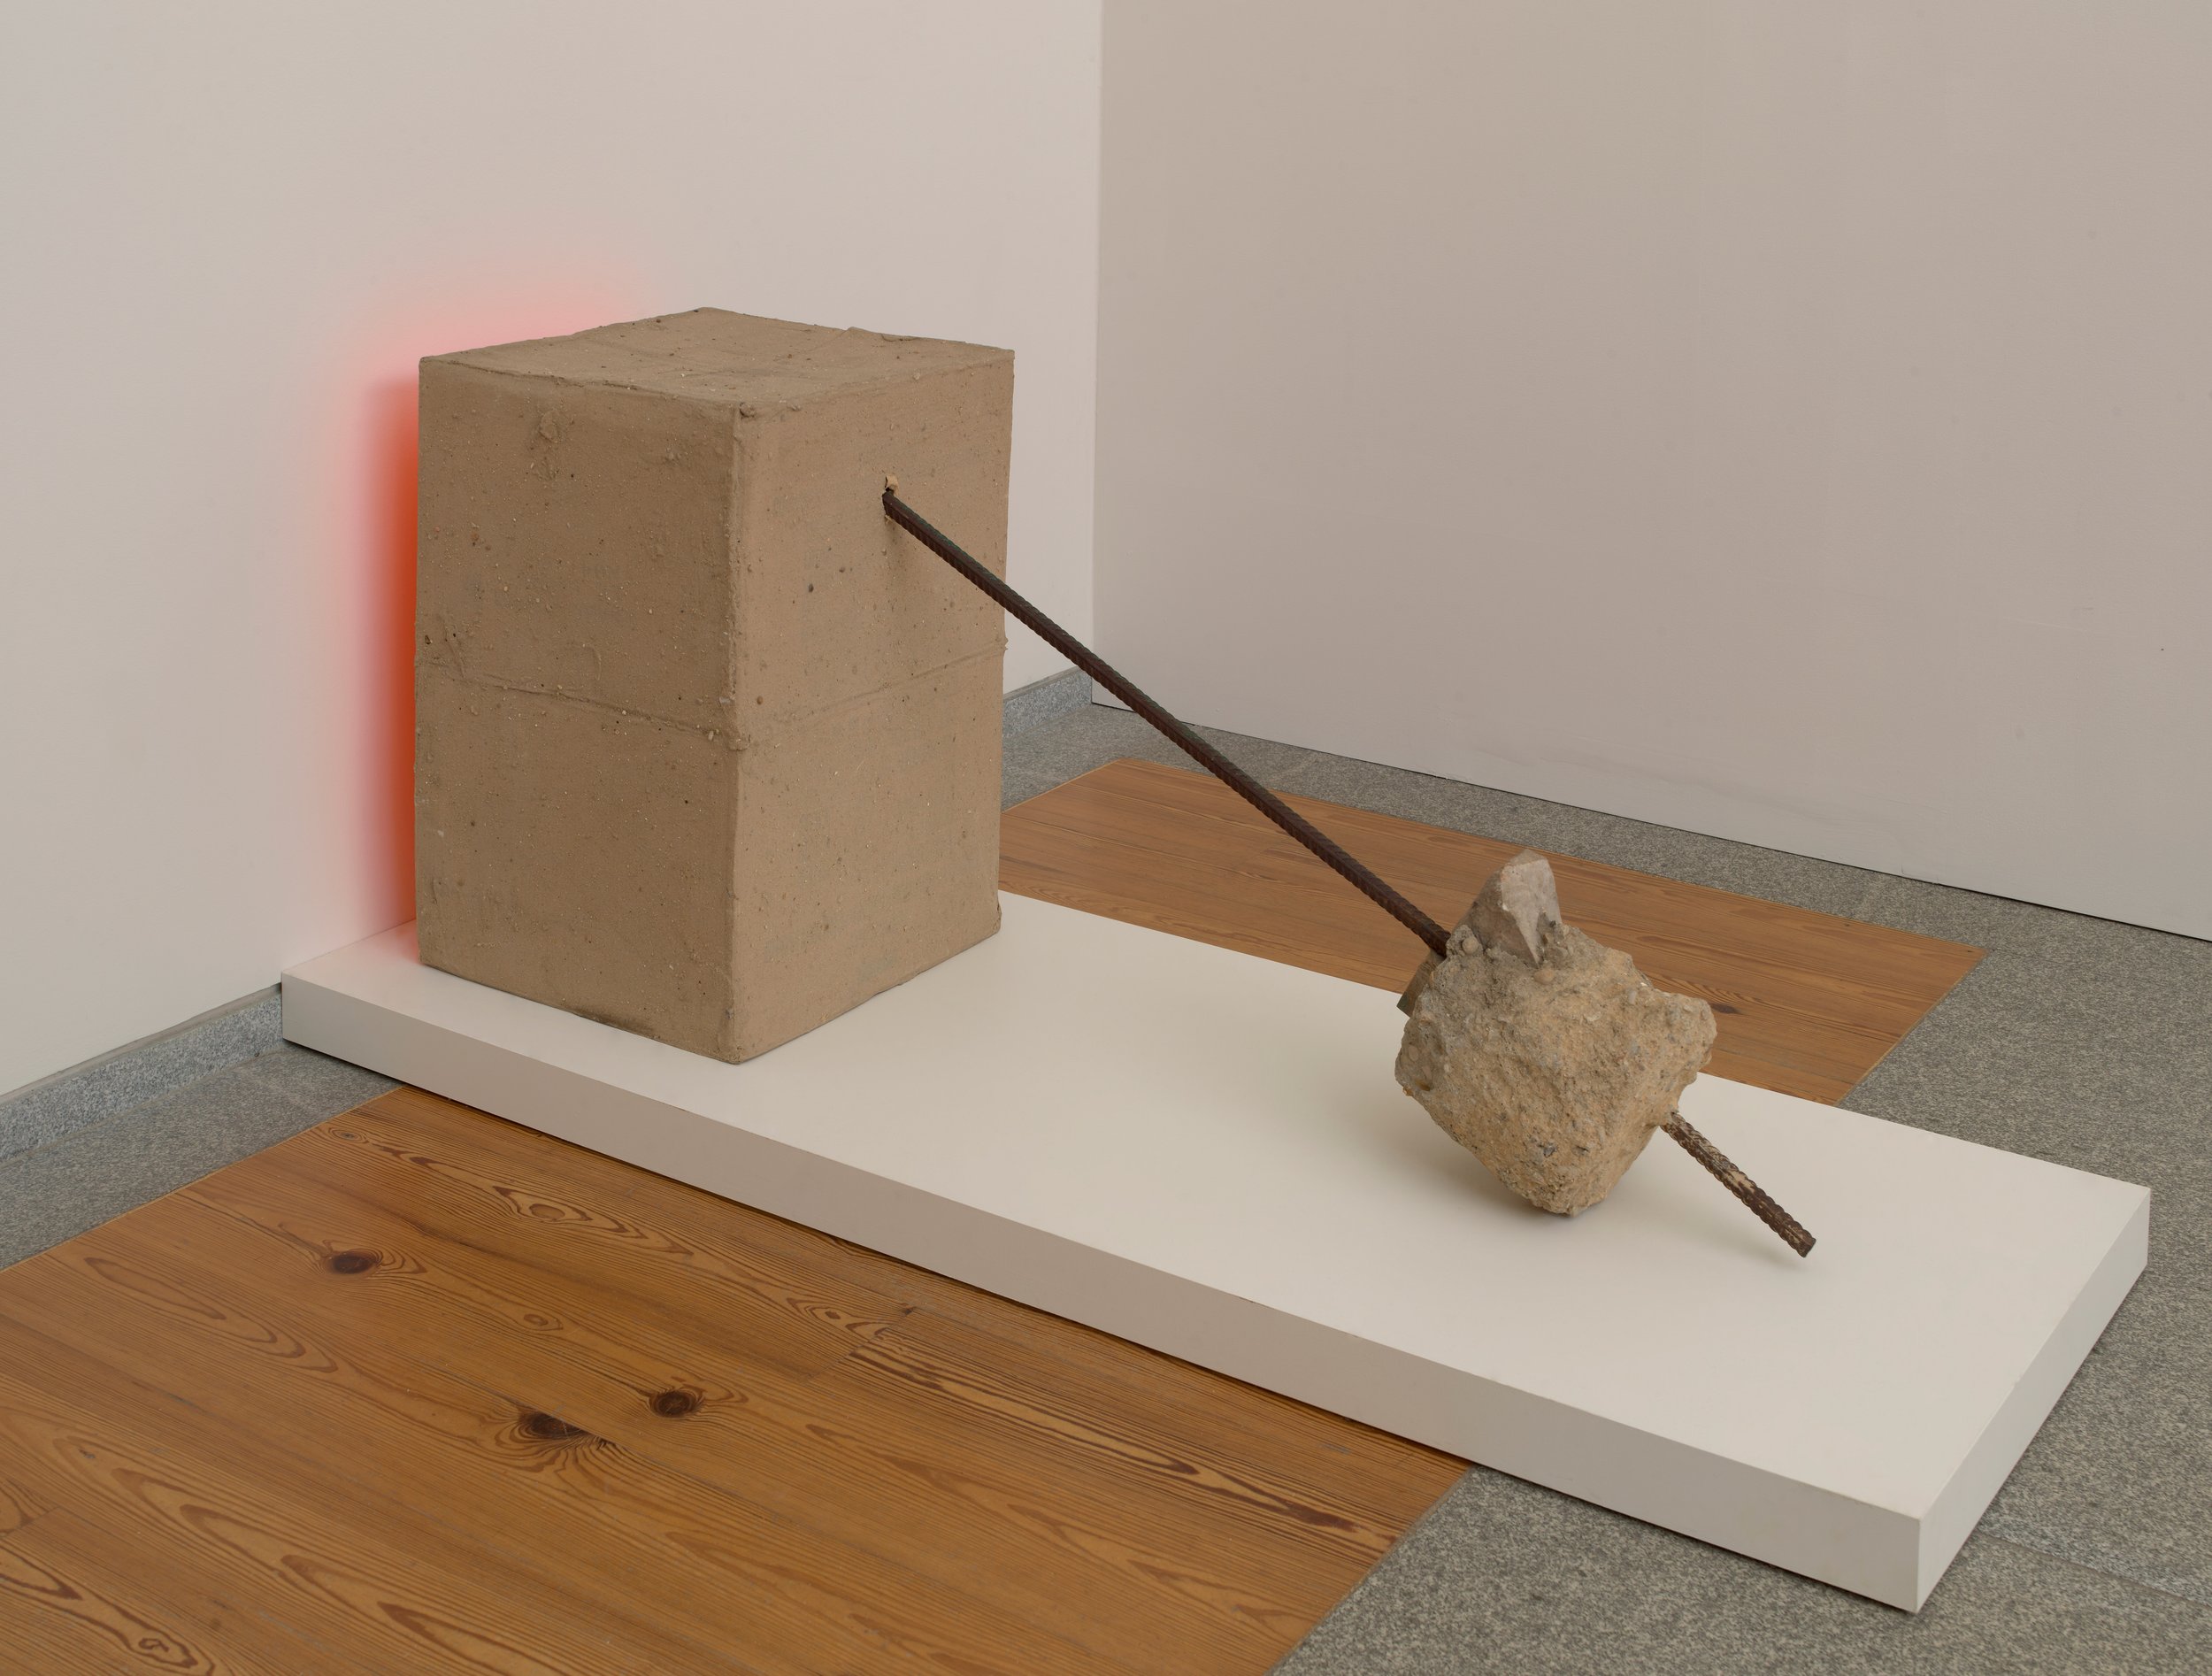   Robert Rauschenberg  United States, 1925–2008  Untitled (Early Egyptian) , 1973 sand and acrylic on cardboard with rebar and cement, 29 7/8 x 21 1/8 x 65 3/4 inches Gift of the Alex Katz Foundation, 2022.27.6 